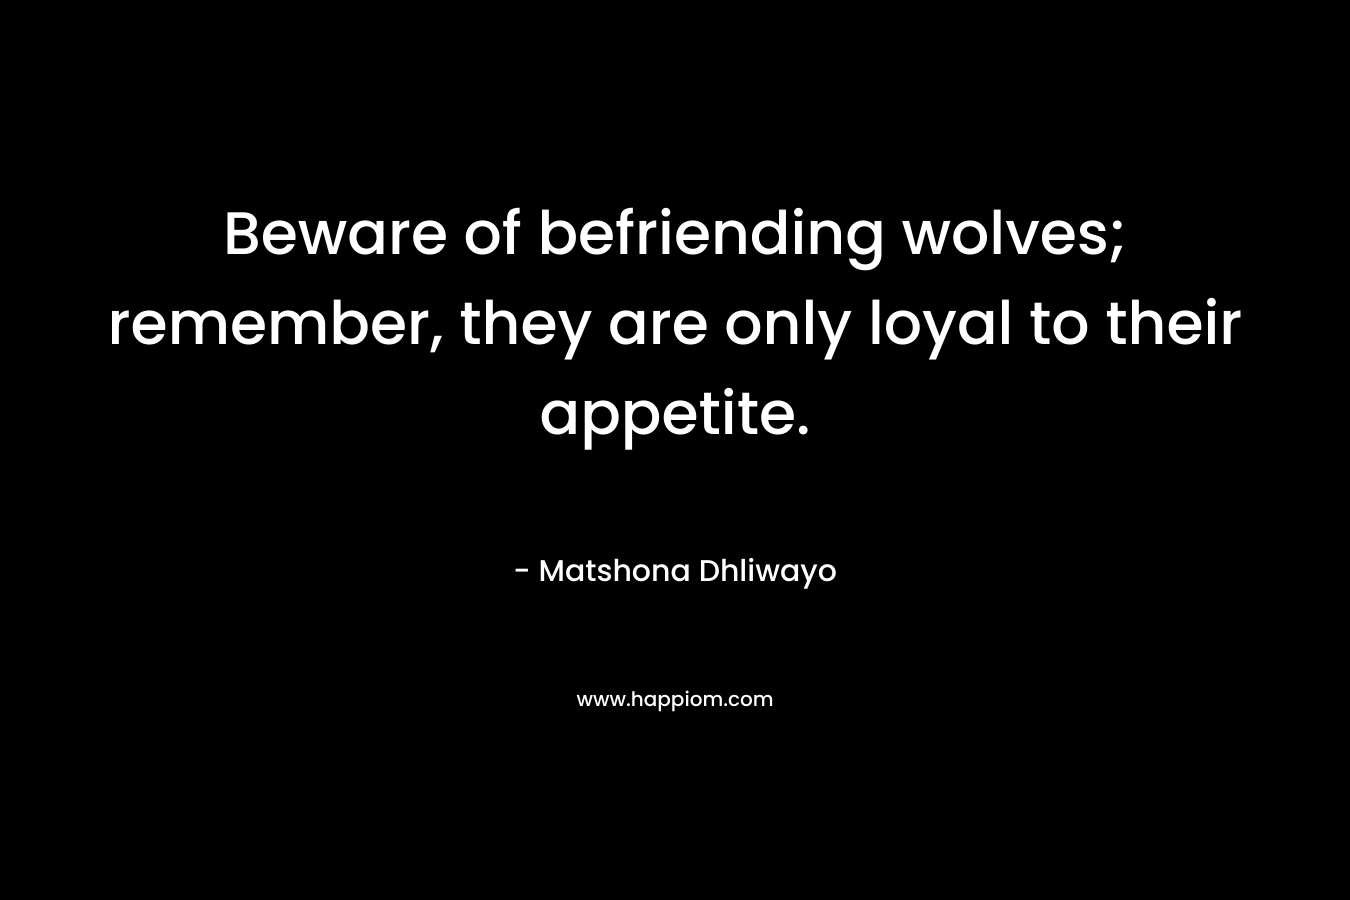 Beware of befriending wolves; remember, they are only loyal to their appetite.